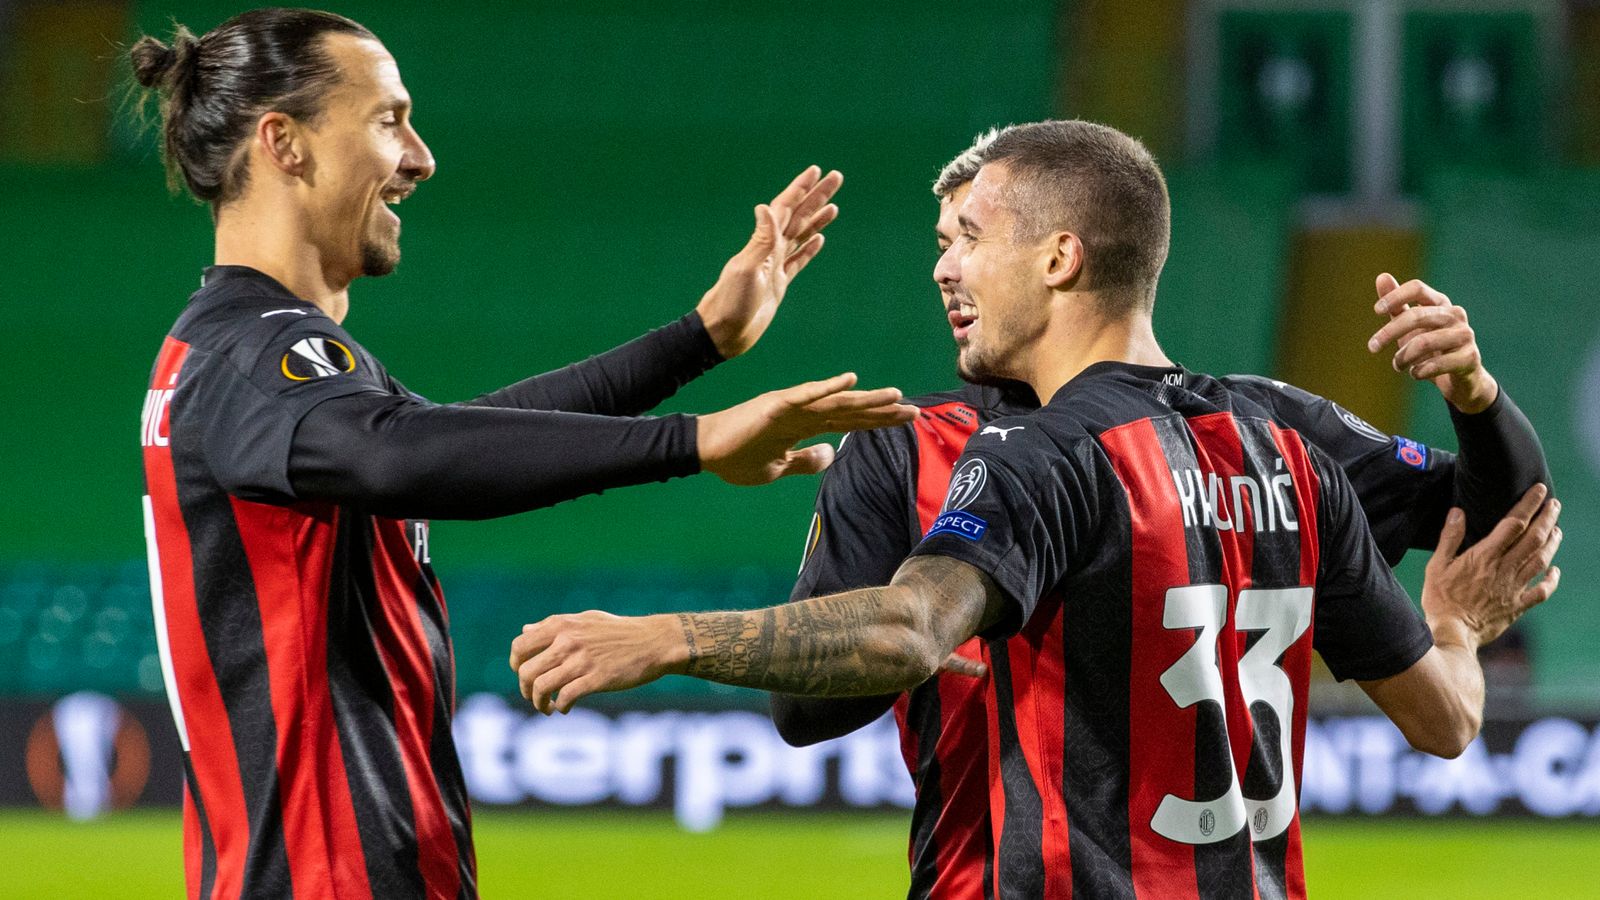 Celtic 1 3 Ac Milan Zlatan Ibrahimovic Leads Charge On Dismal Night For Neil Lennon S Side Football News Sky Sports